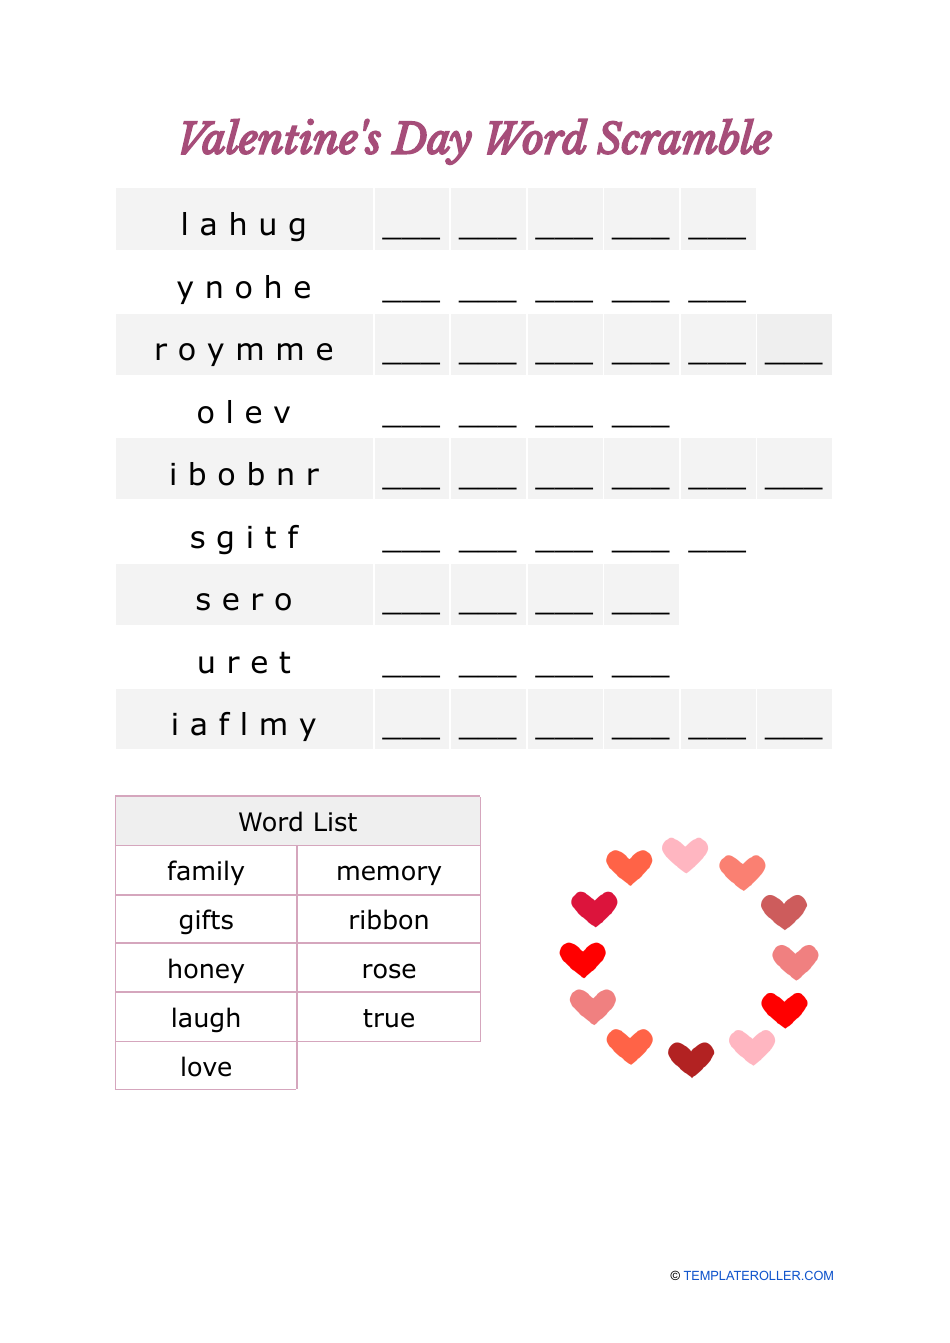 Valentine's Day Word Scramble - Circle of Hearts